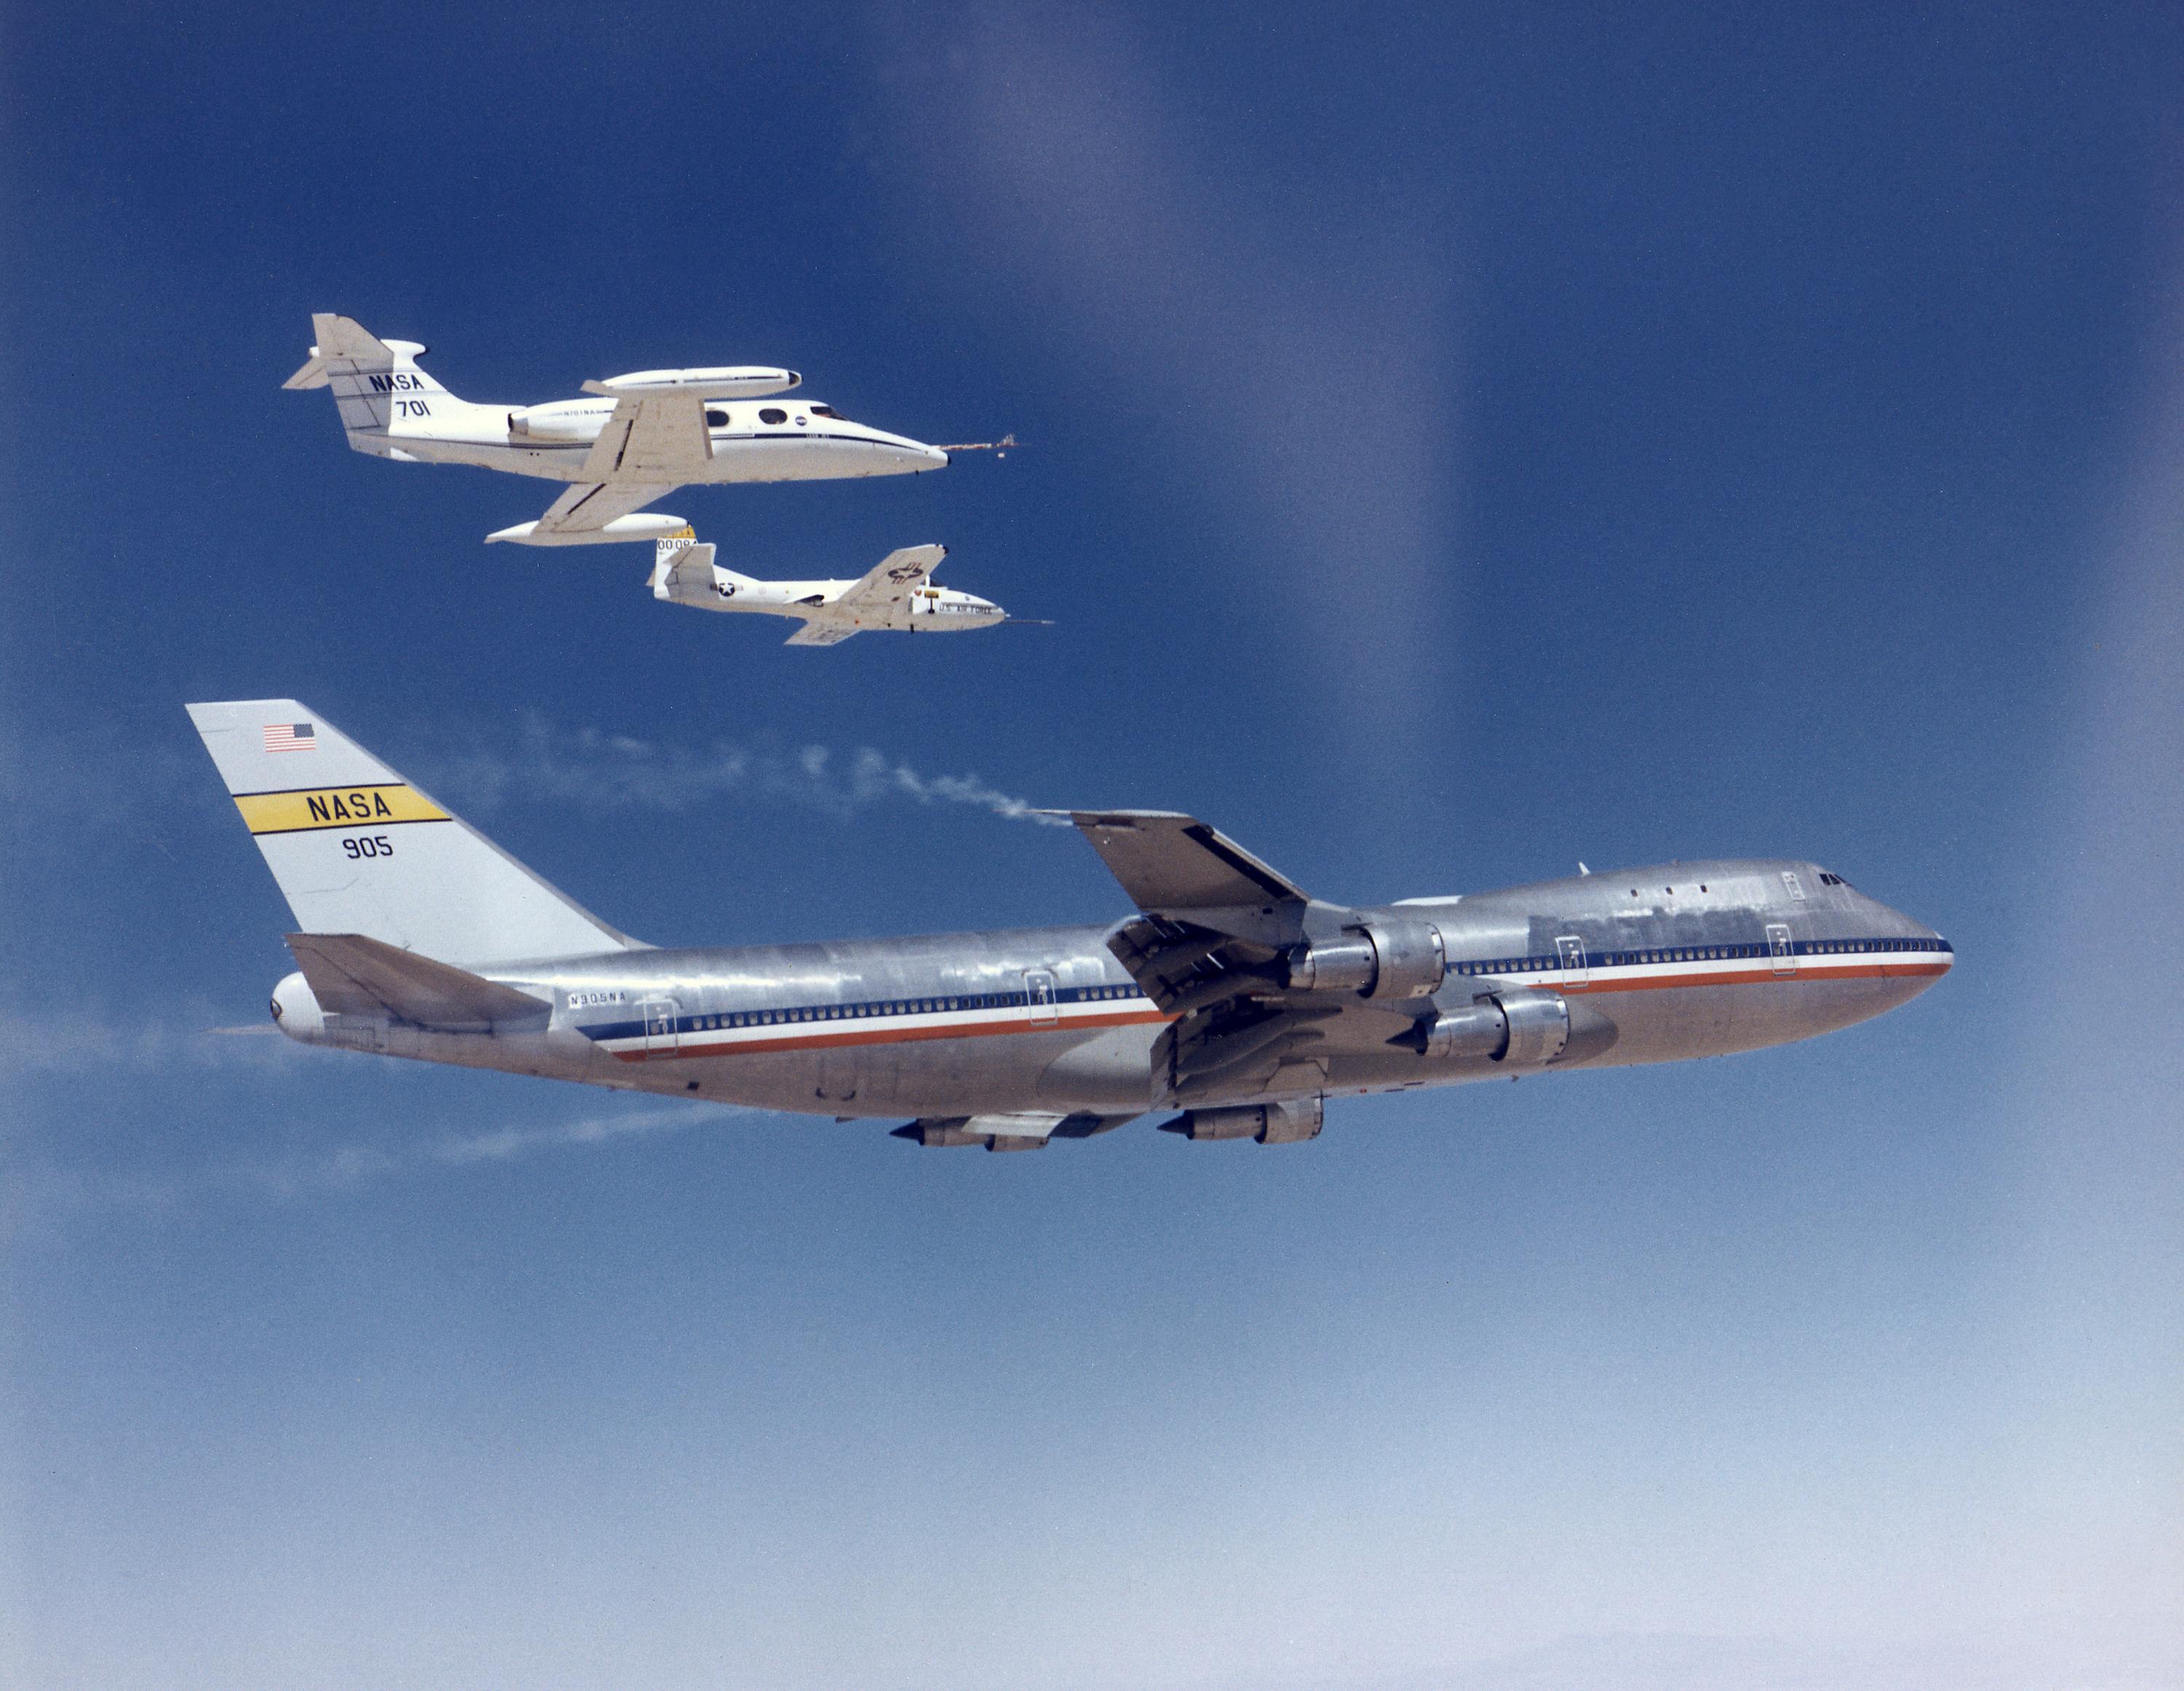 Boeing 747-123, N905NA, during wake vortex studies, 20 September 1974. The other aircraft in the photograph are a Cessna T-37B, N807NA and a Learjet 24, N701NA. (NASA)